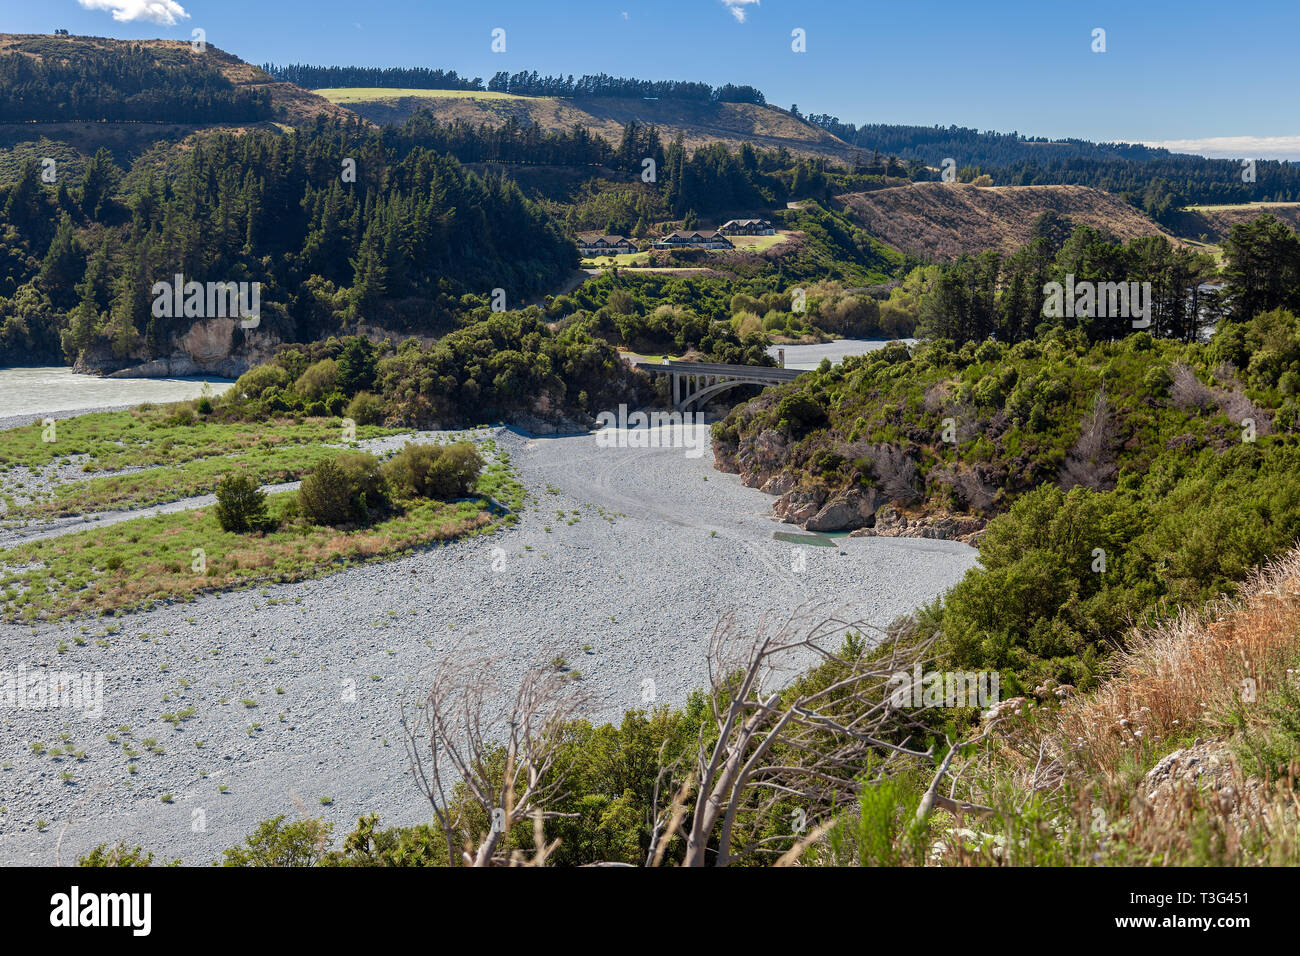 View of the dried up Rakaia River bed in summertime Stock Photo